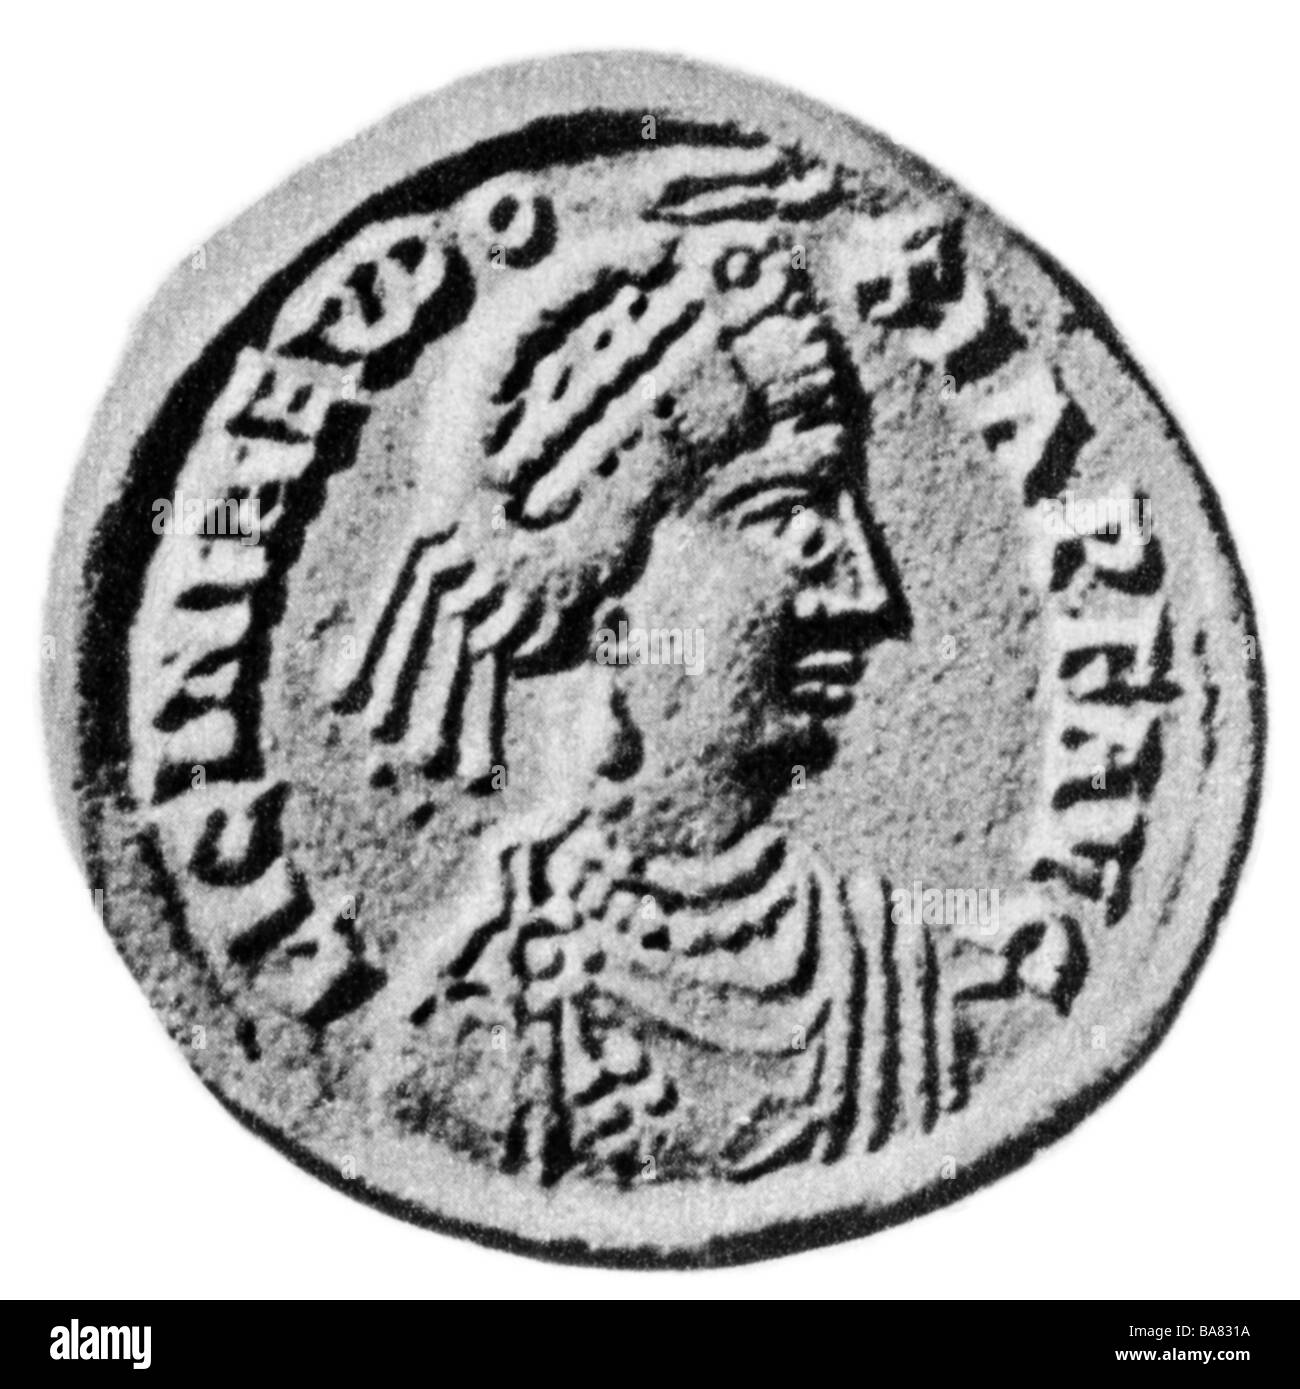 Eudoxia, Licinia, 422 - 462, Roman empress, portrait, coin image, Solidus, minted to celebrate the marriage with Emperor Valentinian III, 437, Stock Photo